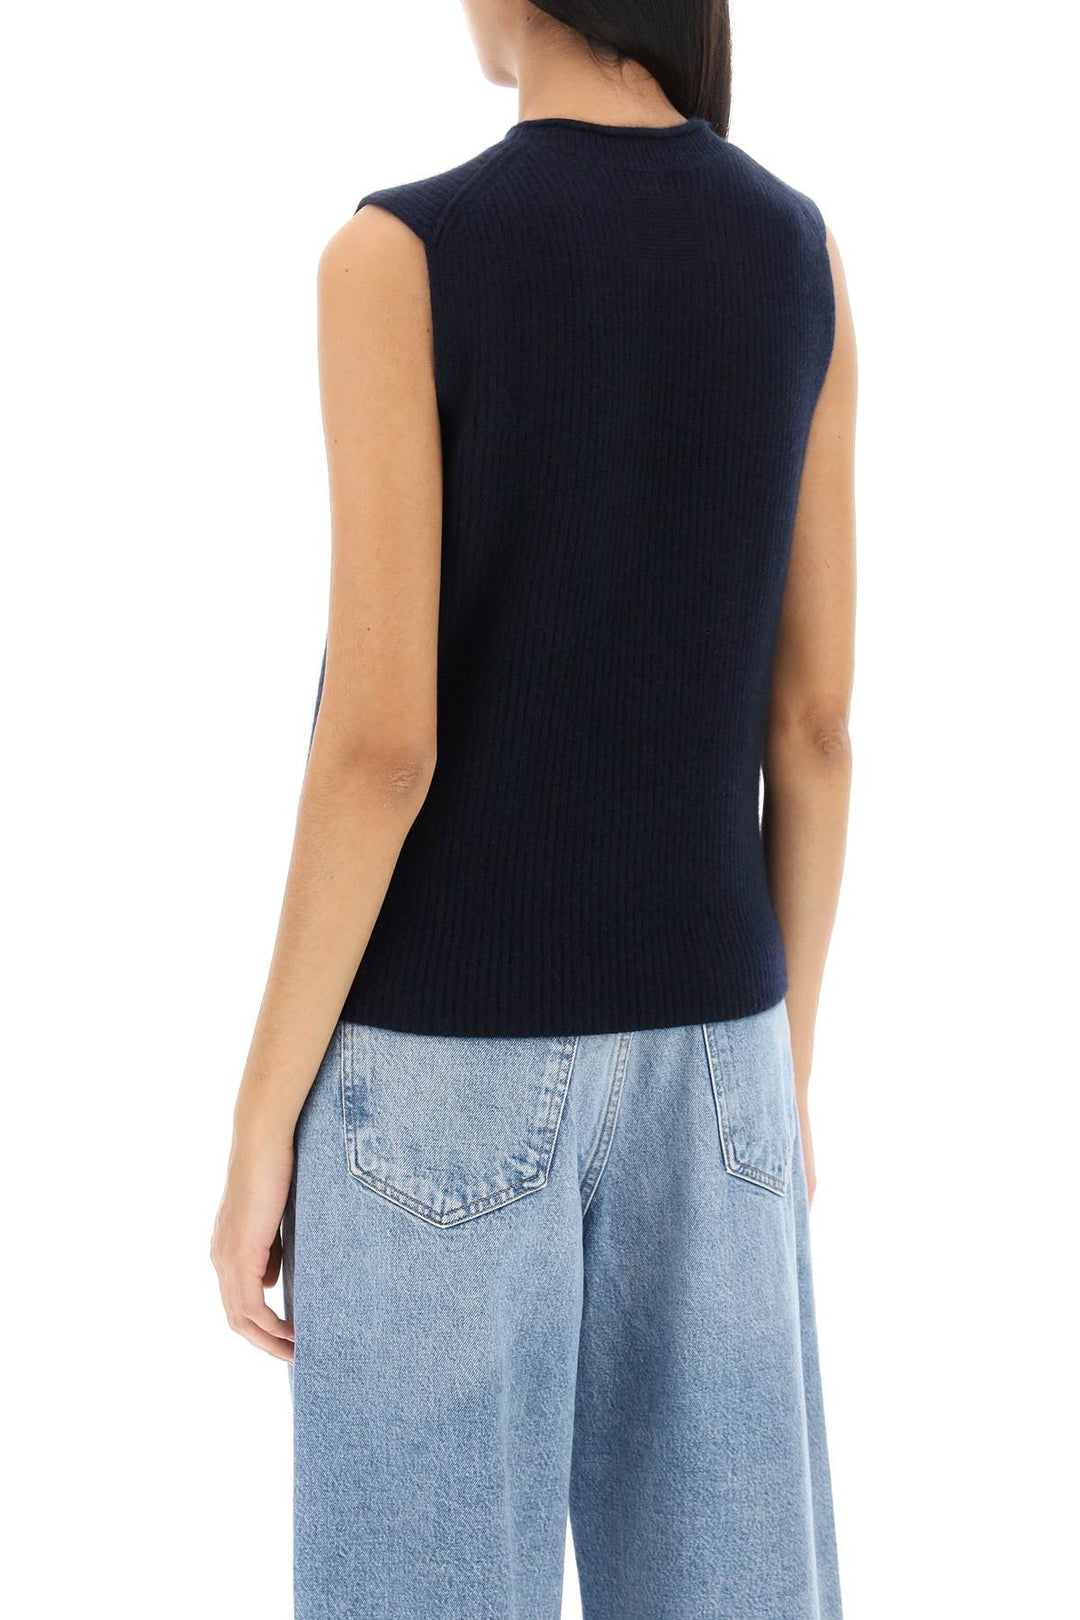 Guest In Residence Layer Up Cashmere Vest   Blu